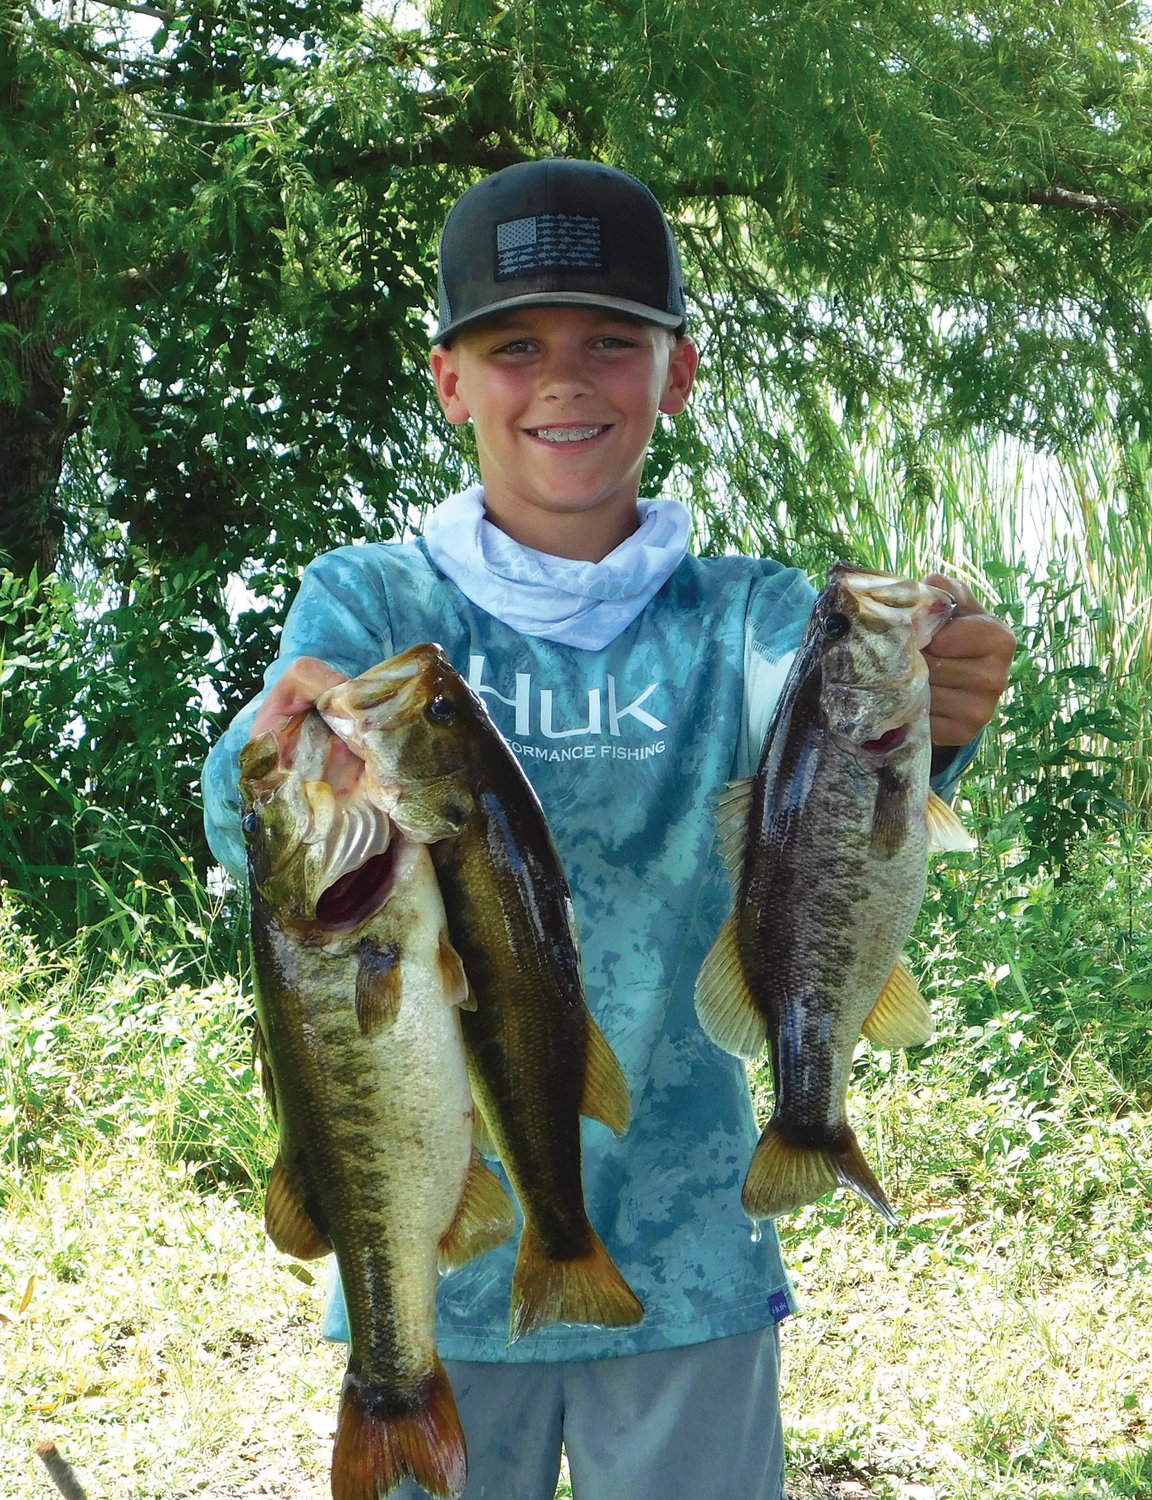 Lane James placed second with 6.34 pounds.